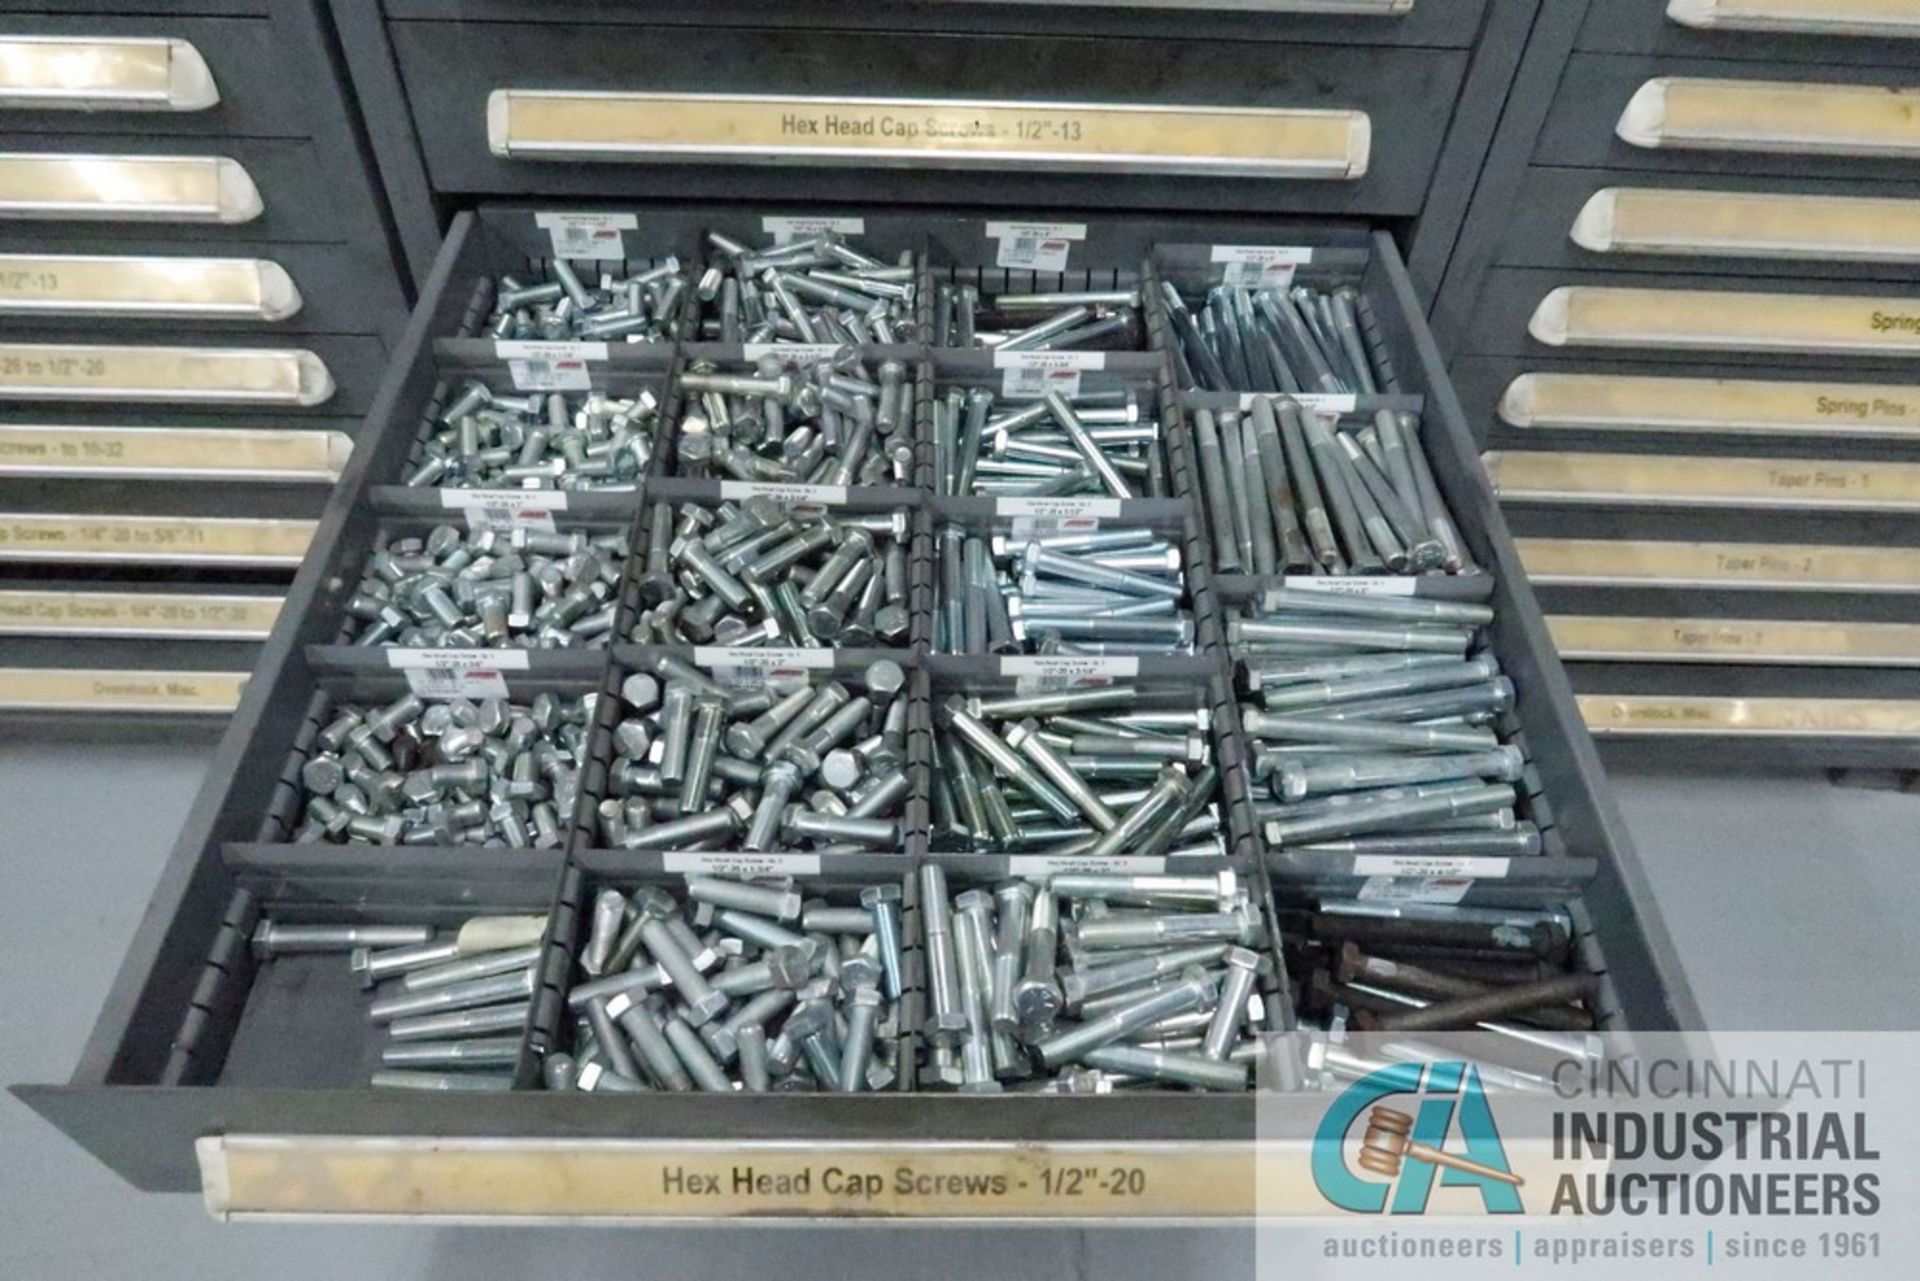 (LOT) 13-DRAWER VIDMAR CABINET WITH CONTENTS INCLUDING HEX HEAD CAP SCREWS (CABINET 7) - Image 10 of 14